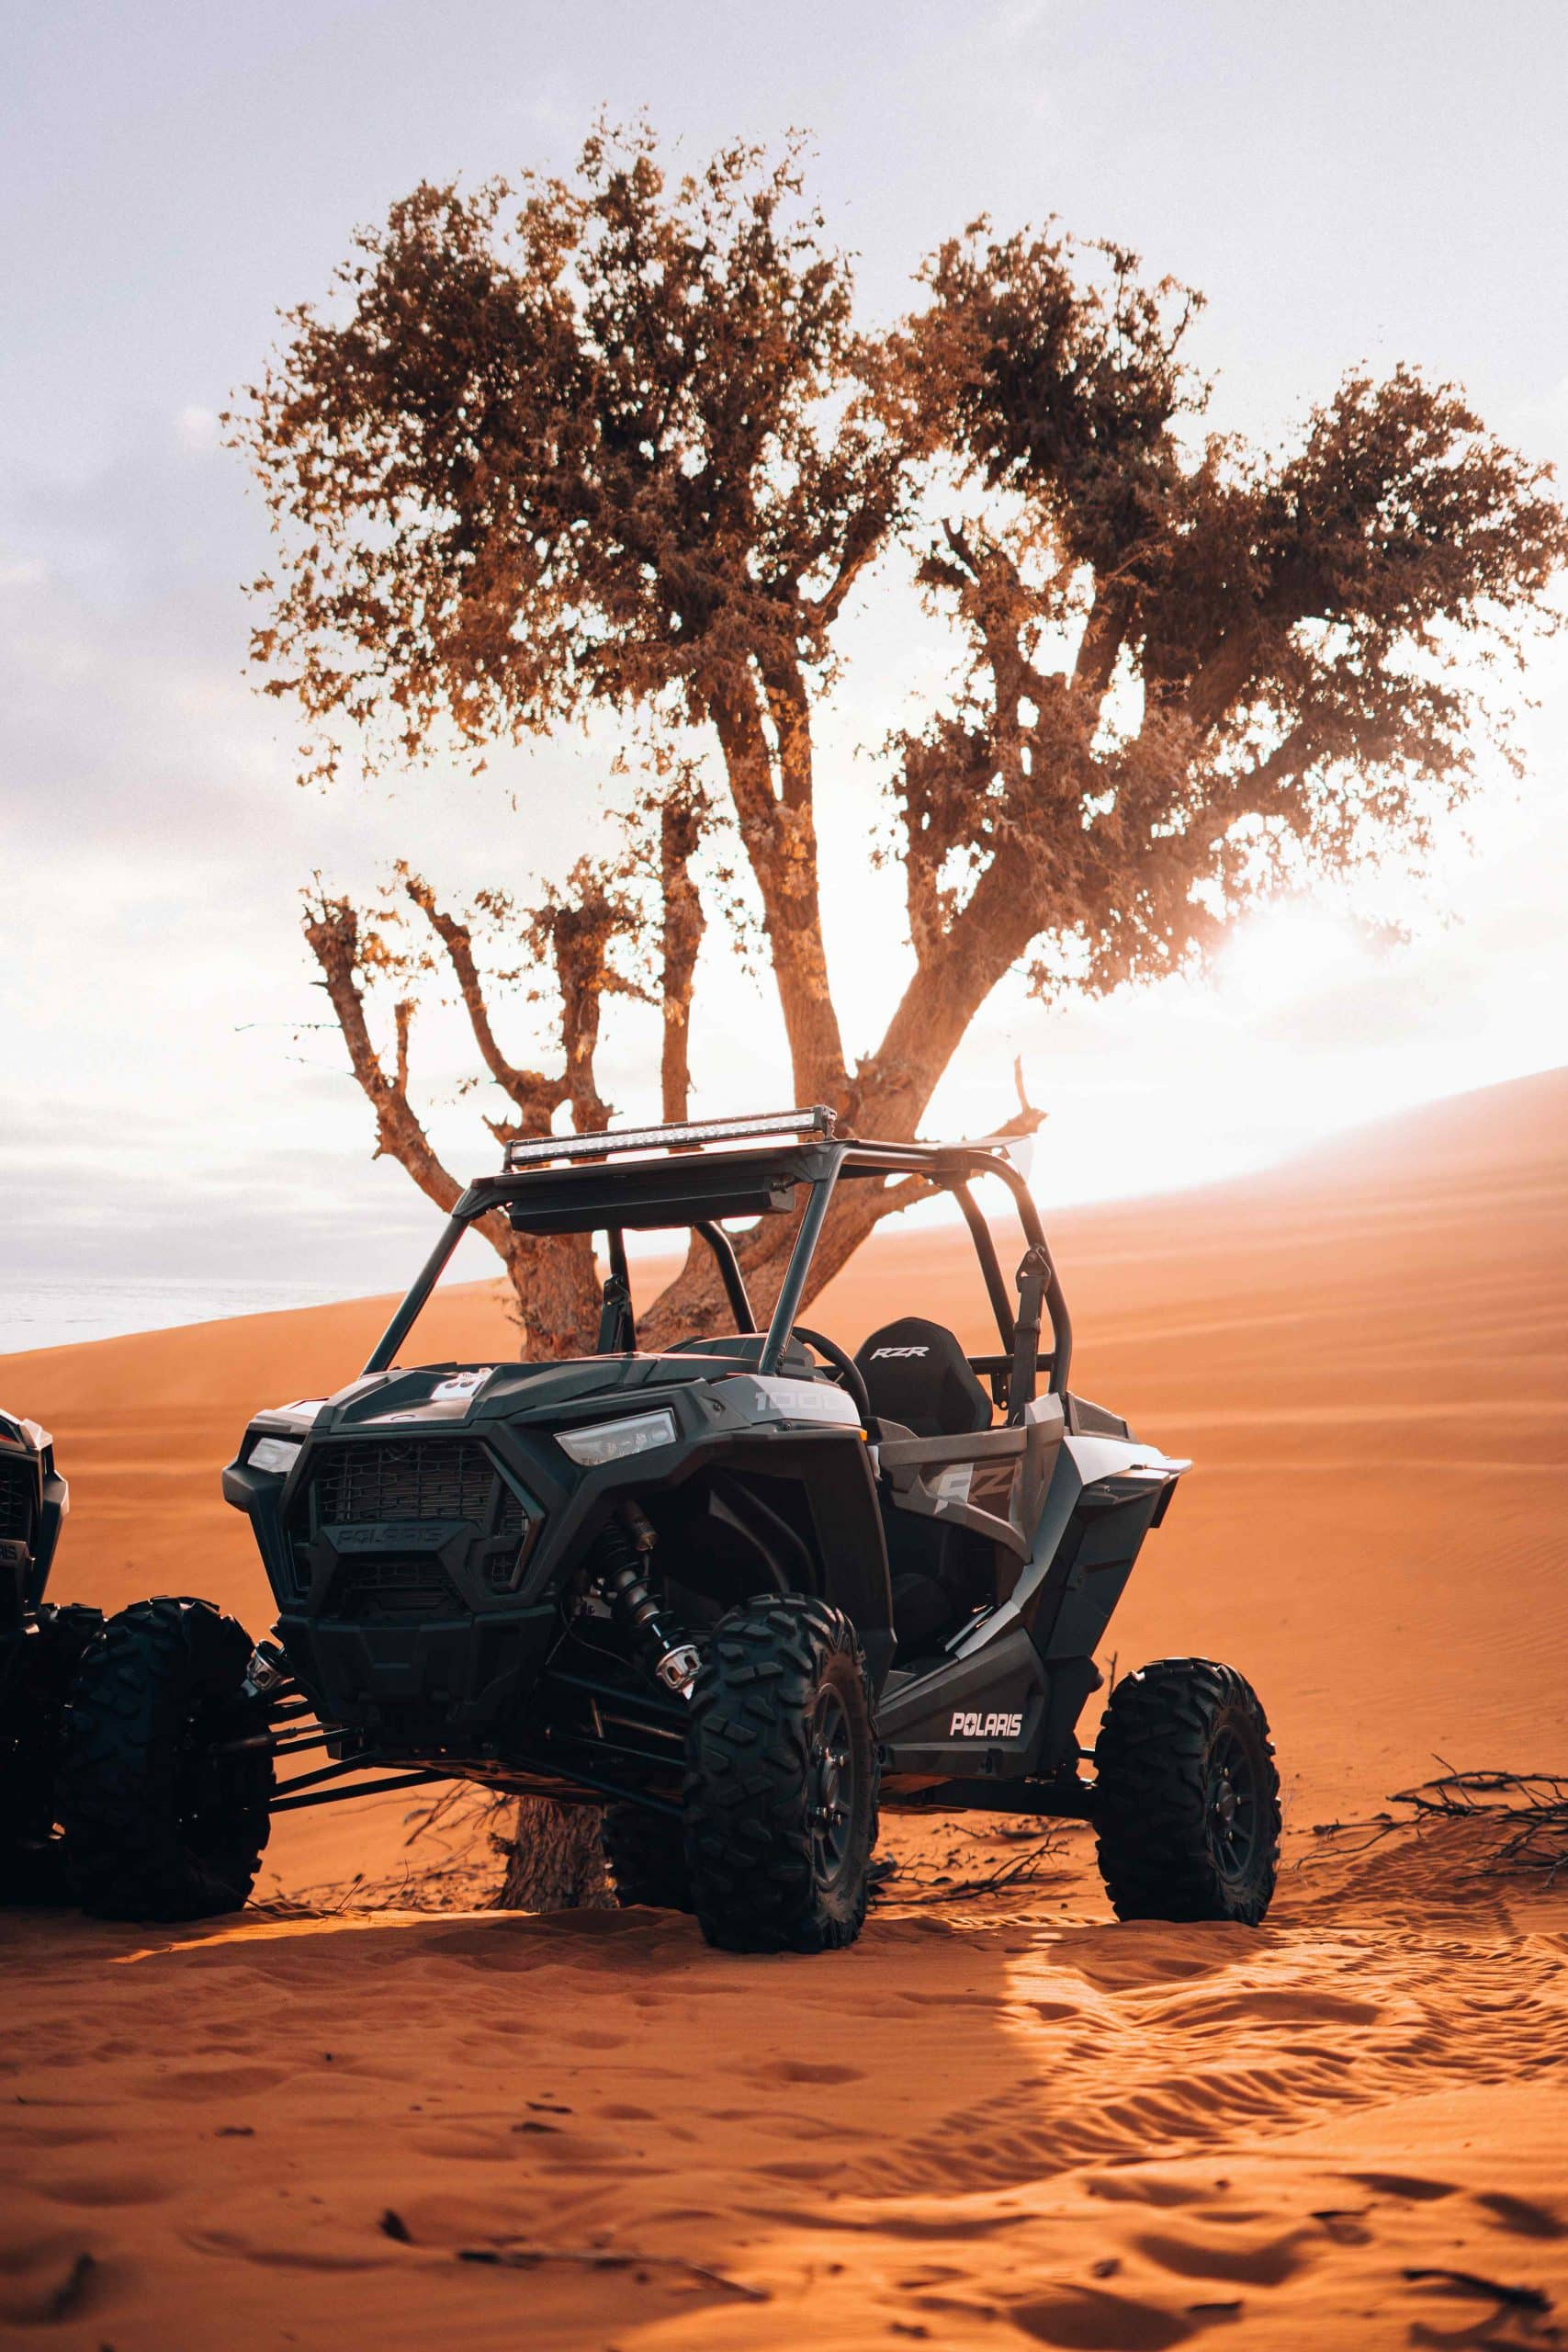 How Much Is The Cost Of Quad Biking In Dubai?